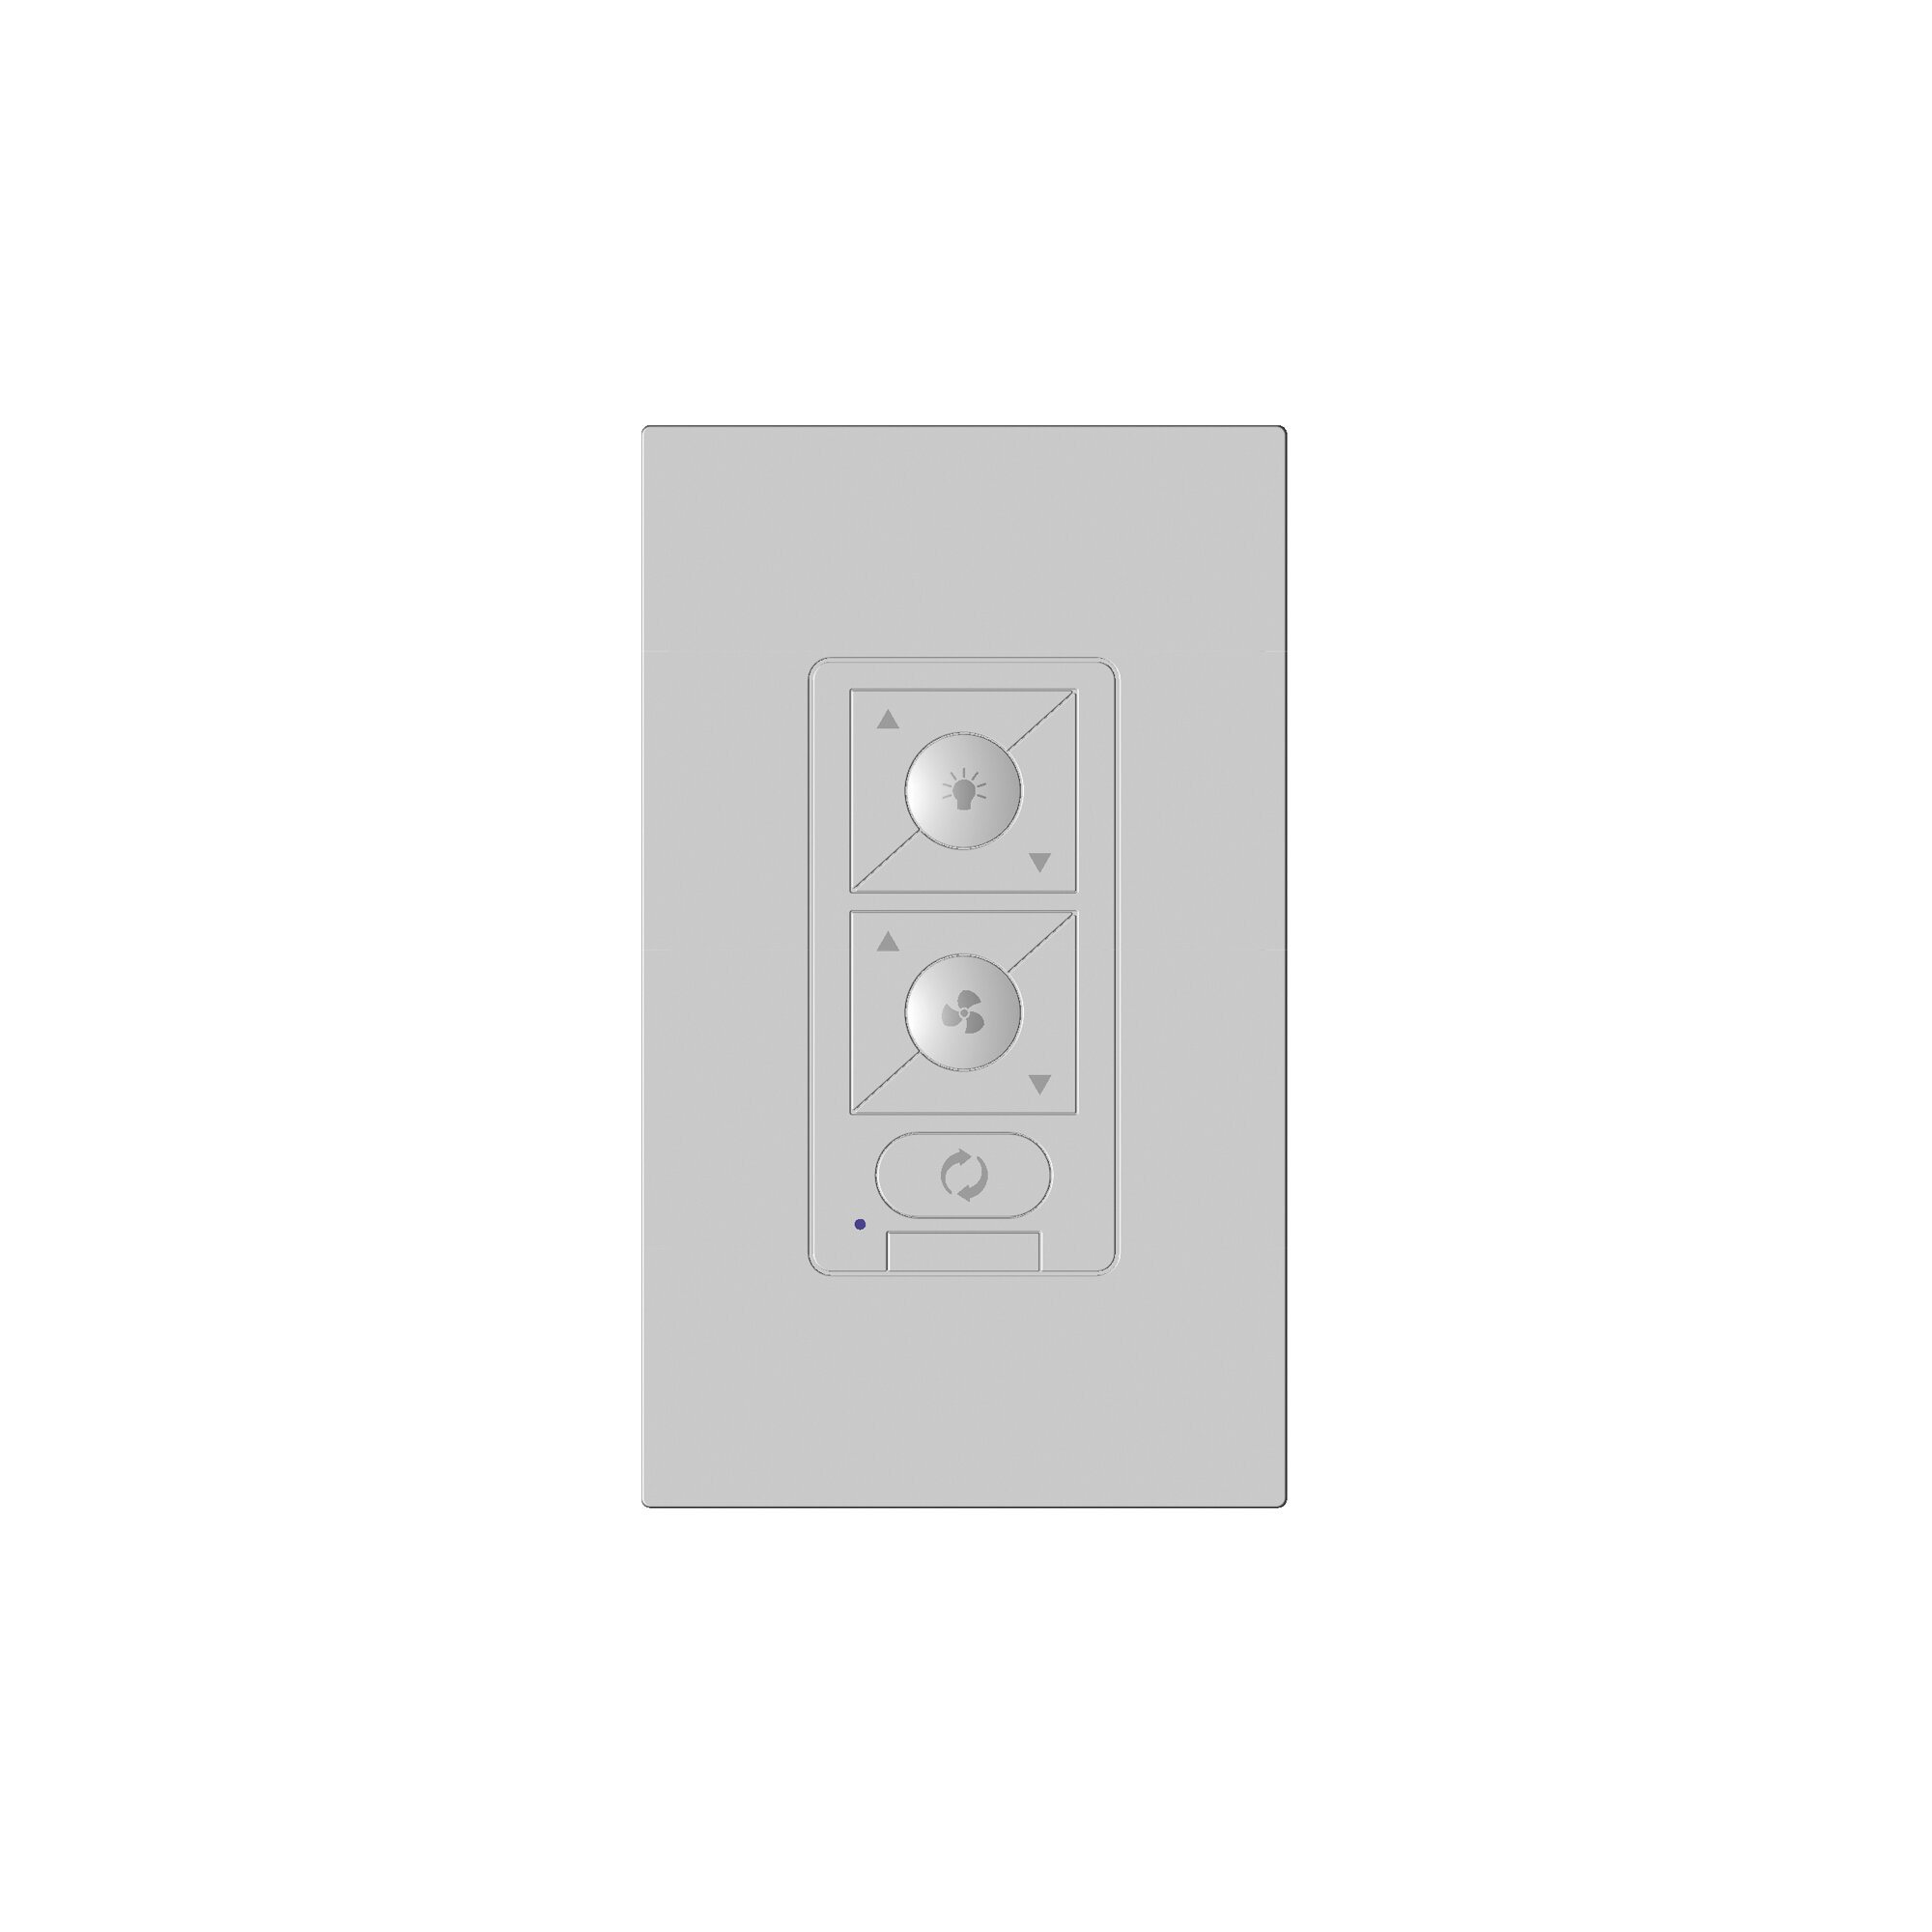 Ceiling Fan Remote And Wall Controls inside dimensions 2000 X 2000